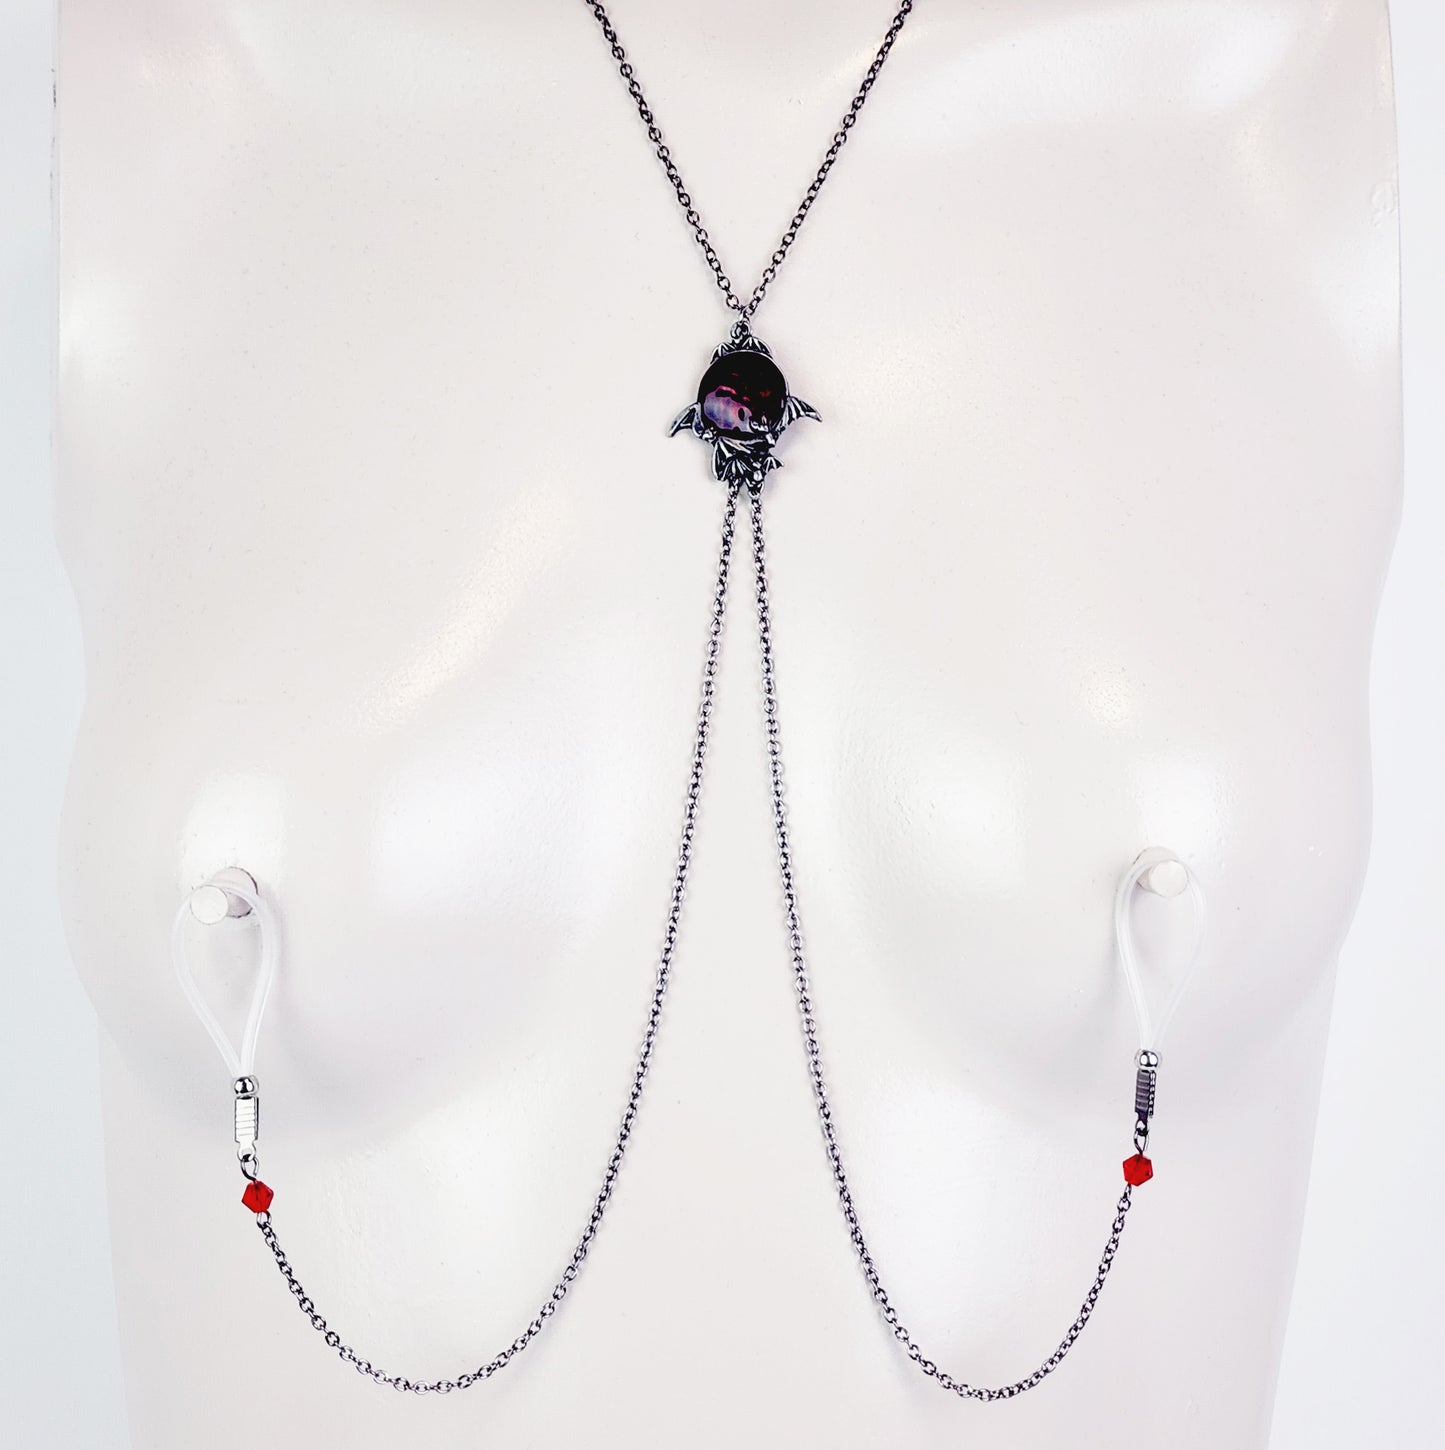 Non Piercing Necklace To Nipple, Gunmetal Black with Bats and Red Pendant. Nipple Nooses, Nipple Clamps, or Rings.